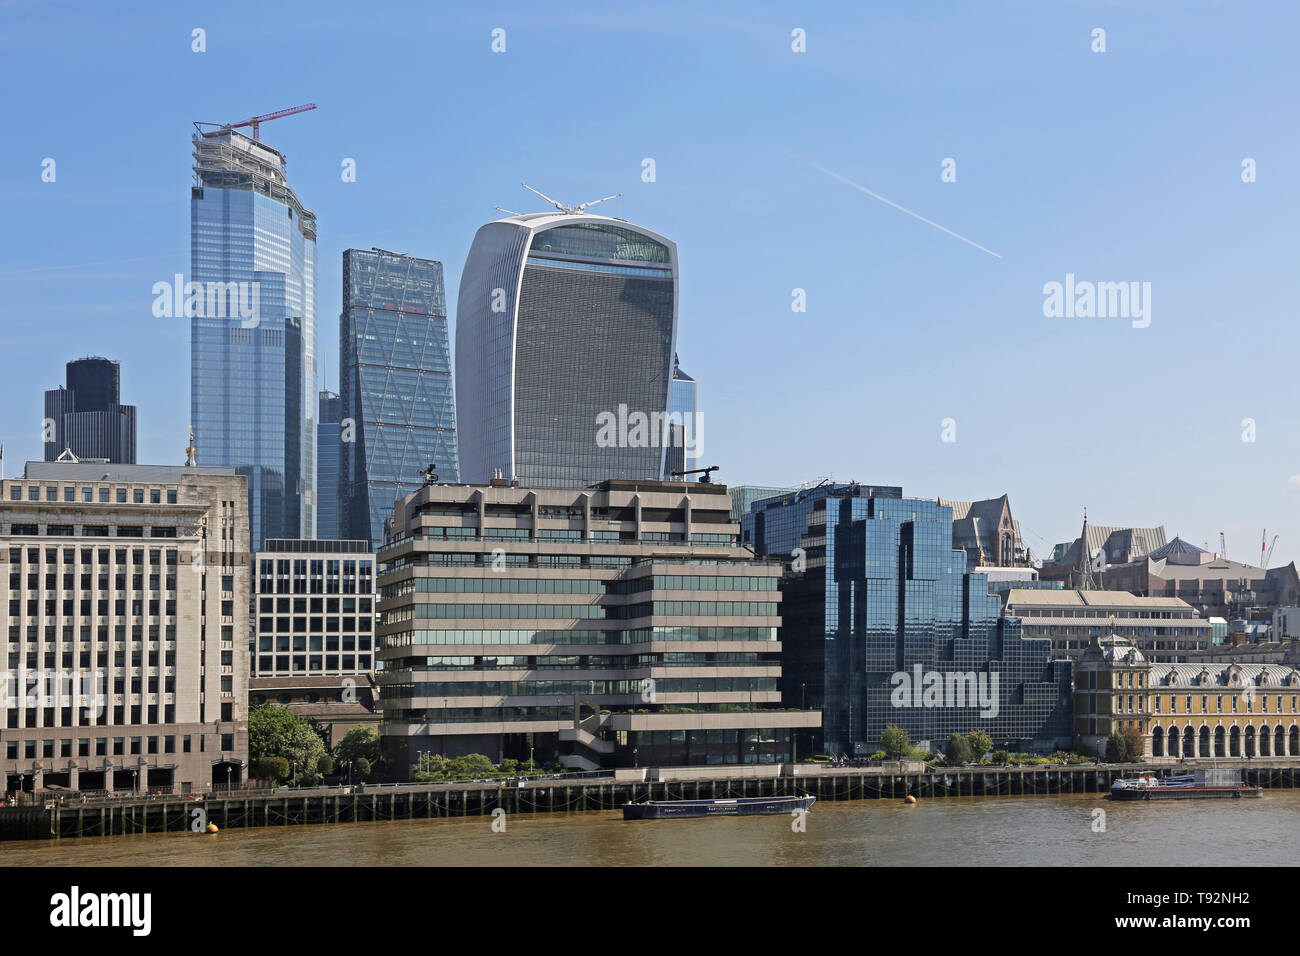 London City skyline - summer 2019. Shows The Pinnacle (under construction), the Cheese-grater and Walkie-Talkie building. River Thames in foreground. Stock Photo